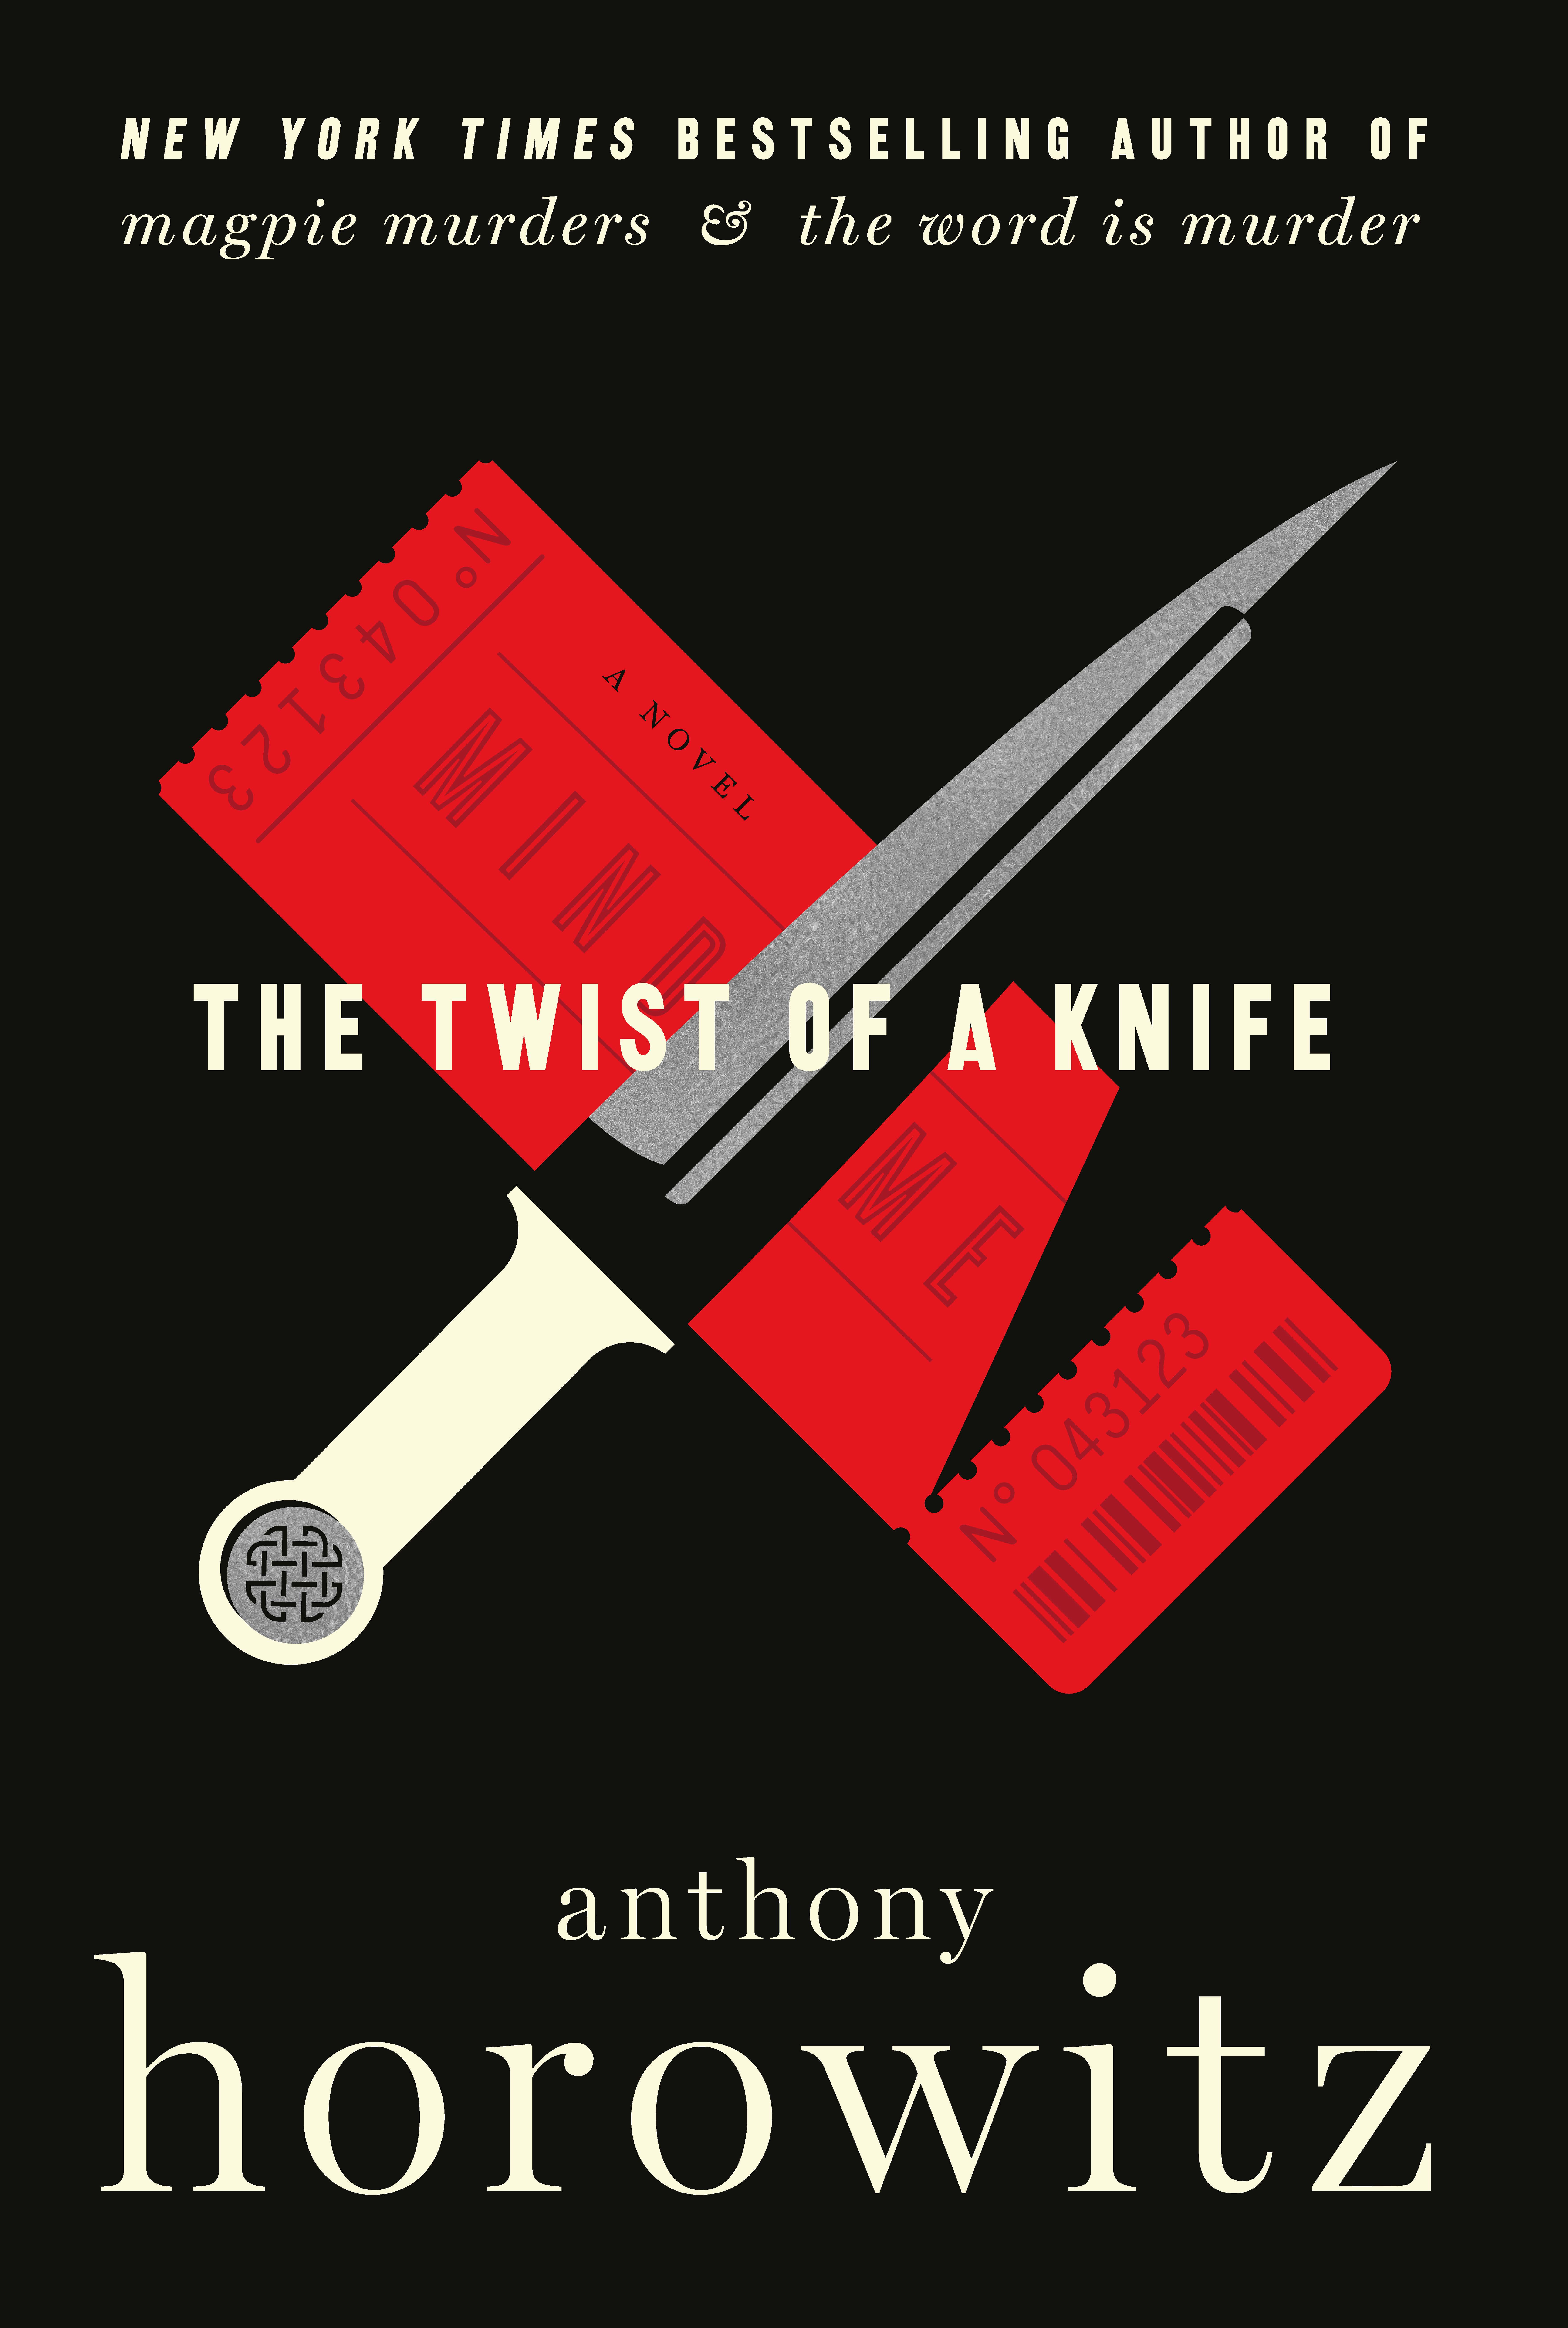 The Twist of a Knife by Anthony Horowitz, 2022